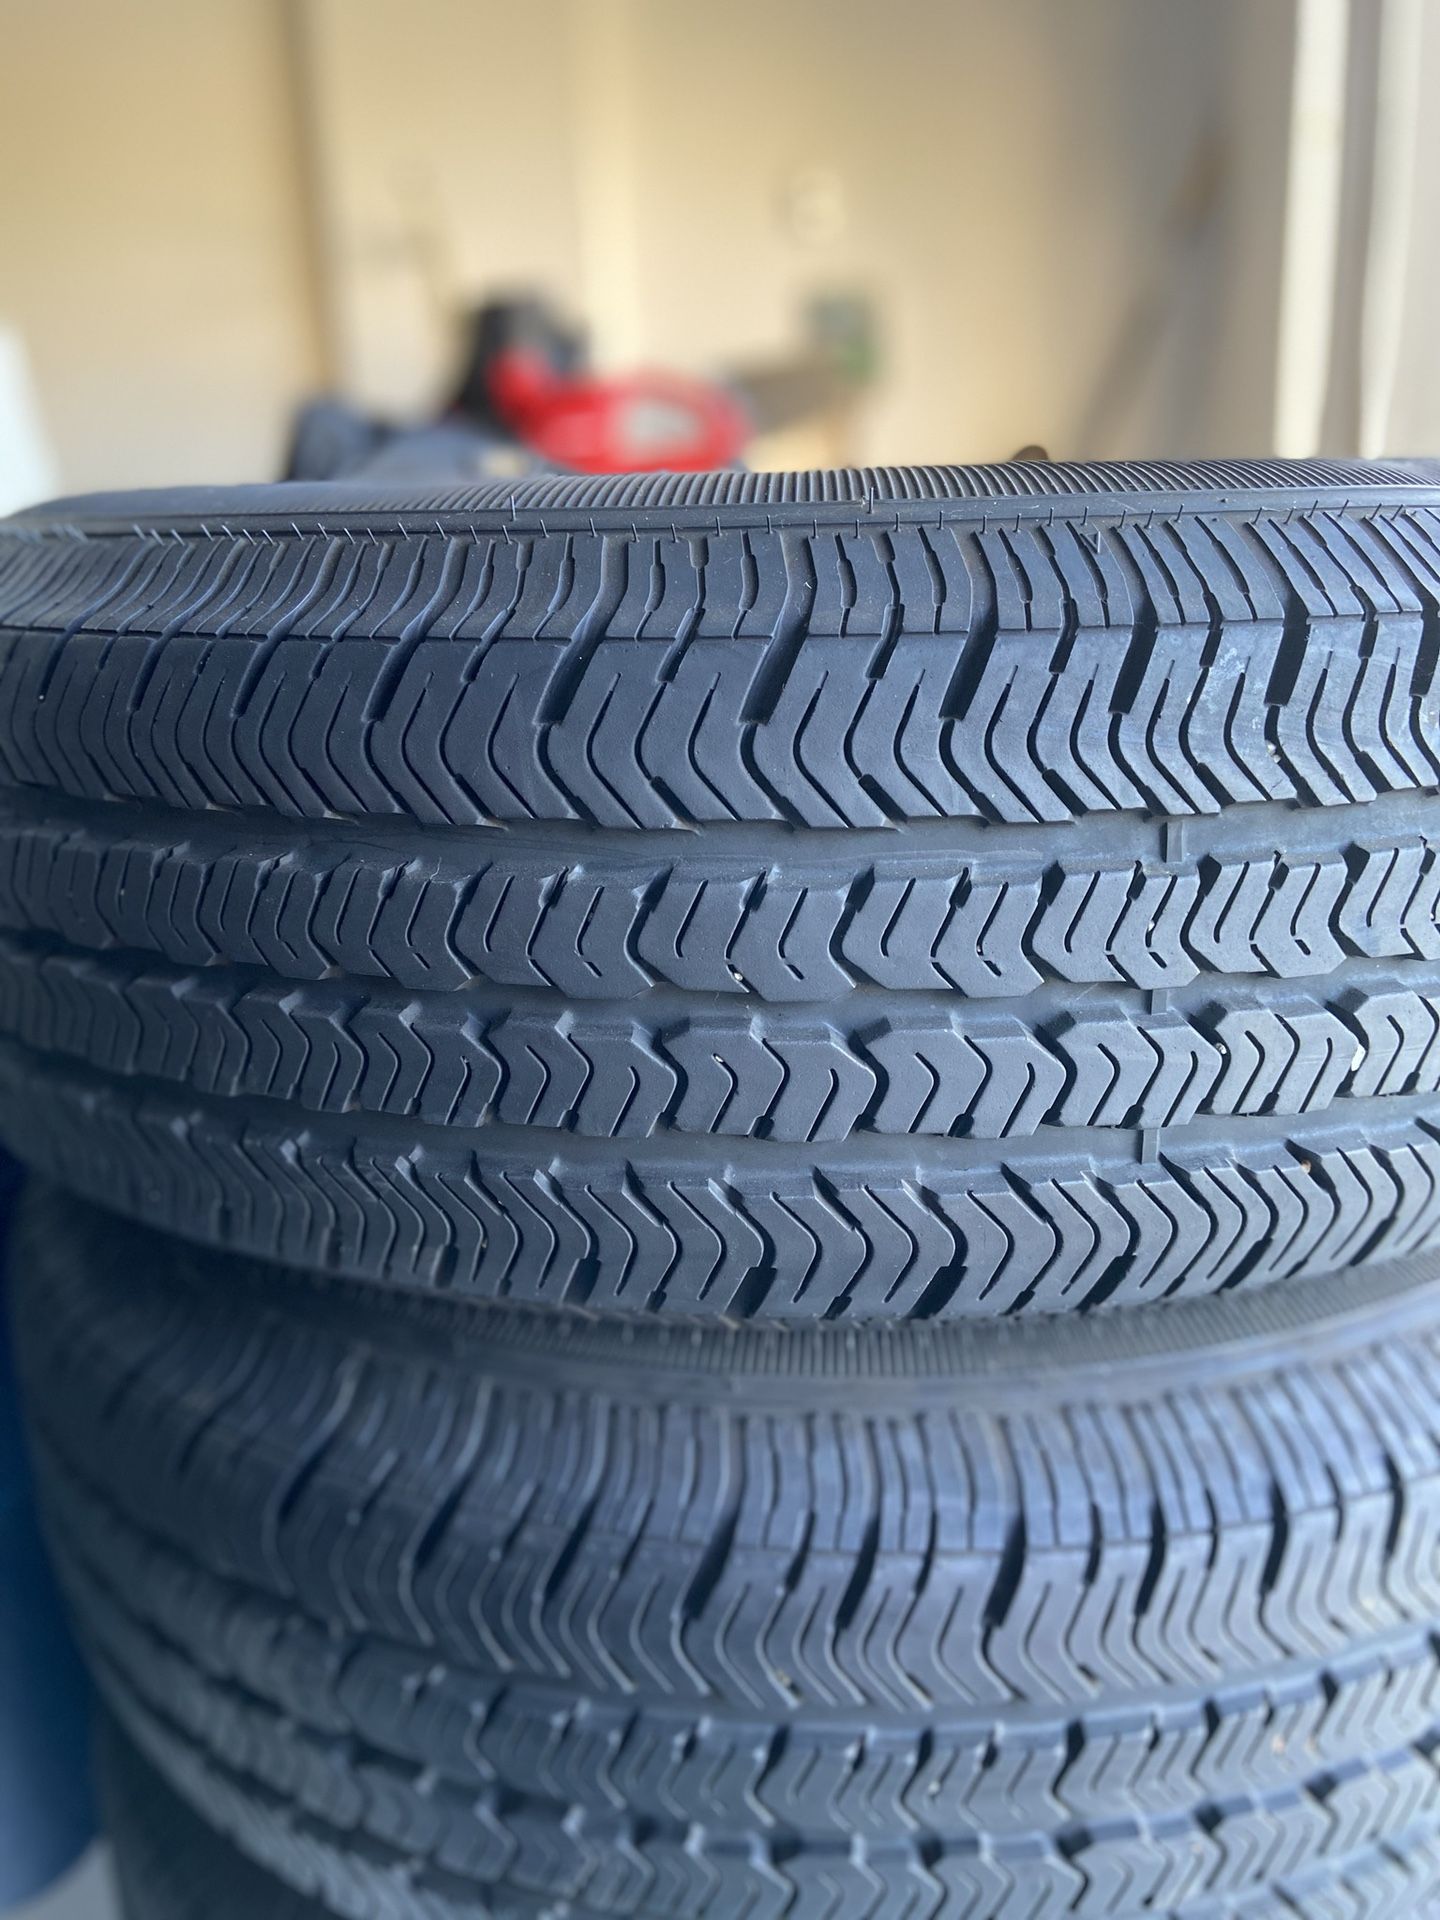 Jeep Wrangler tires and wheels (less than 1000 miles)